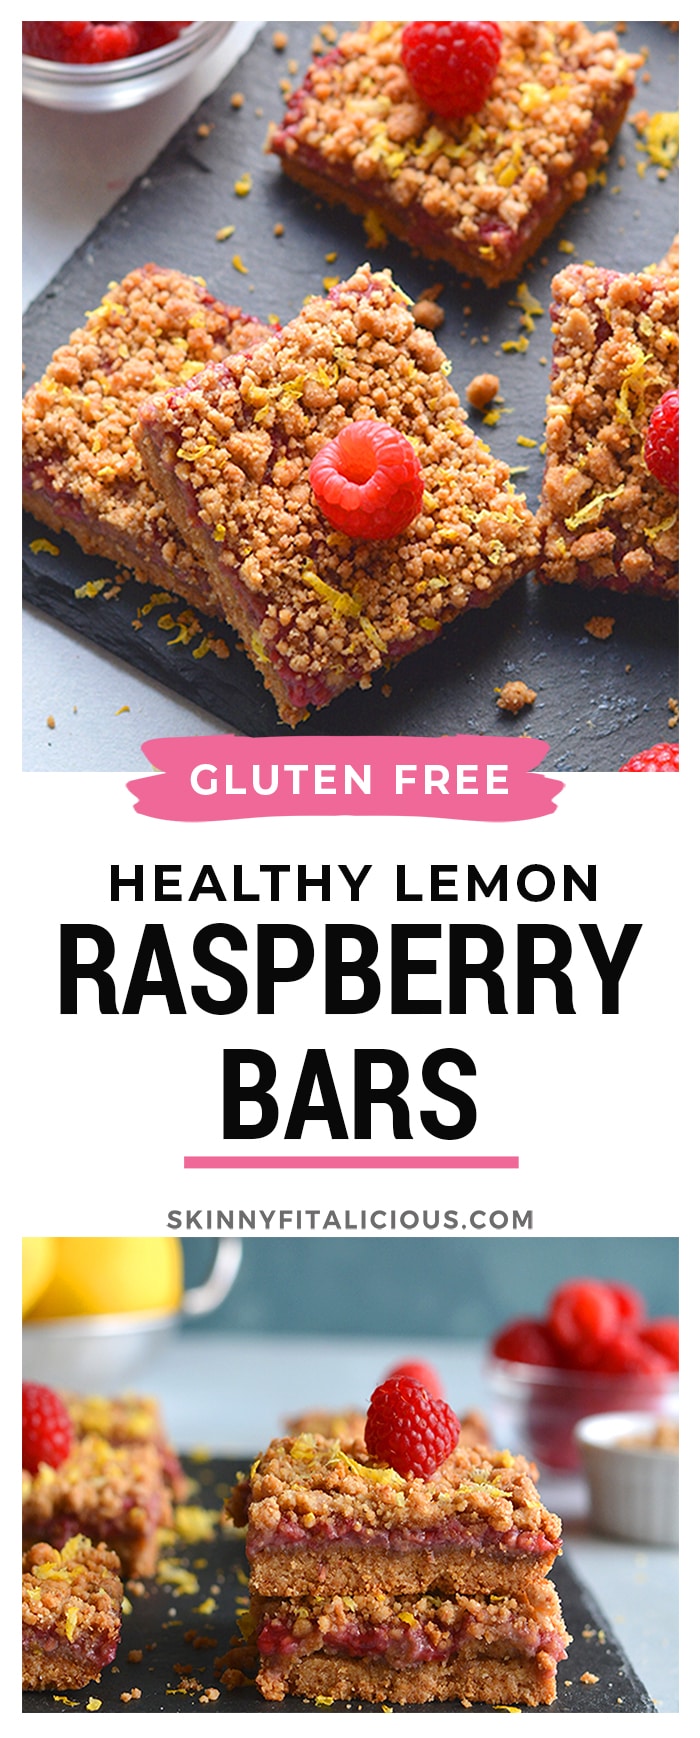 Raspberry Crumb Bars! Dairy-free, made with almond flour and wholesome ingredients! A truly addicting grain-free dessert that's good for you.